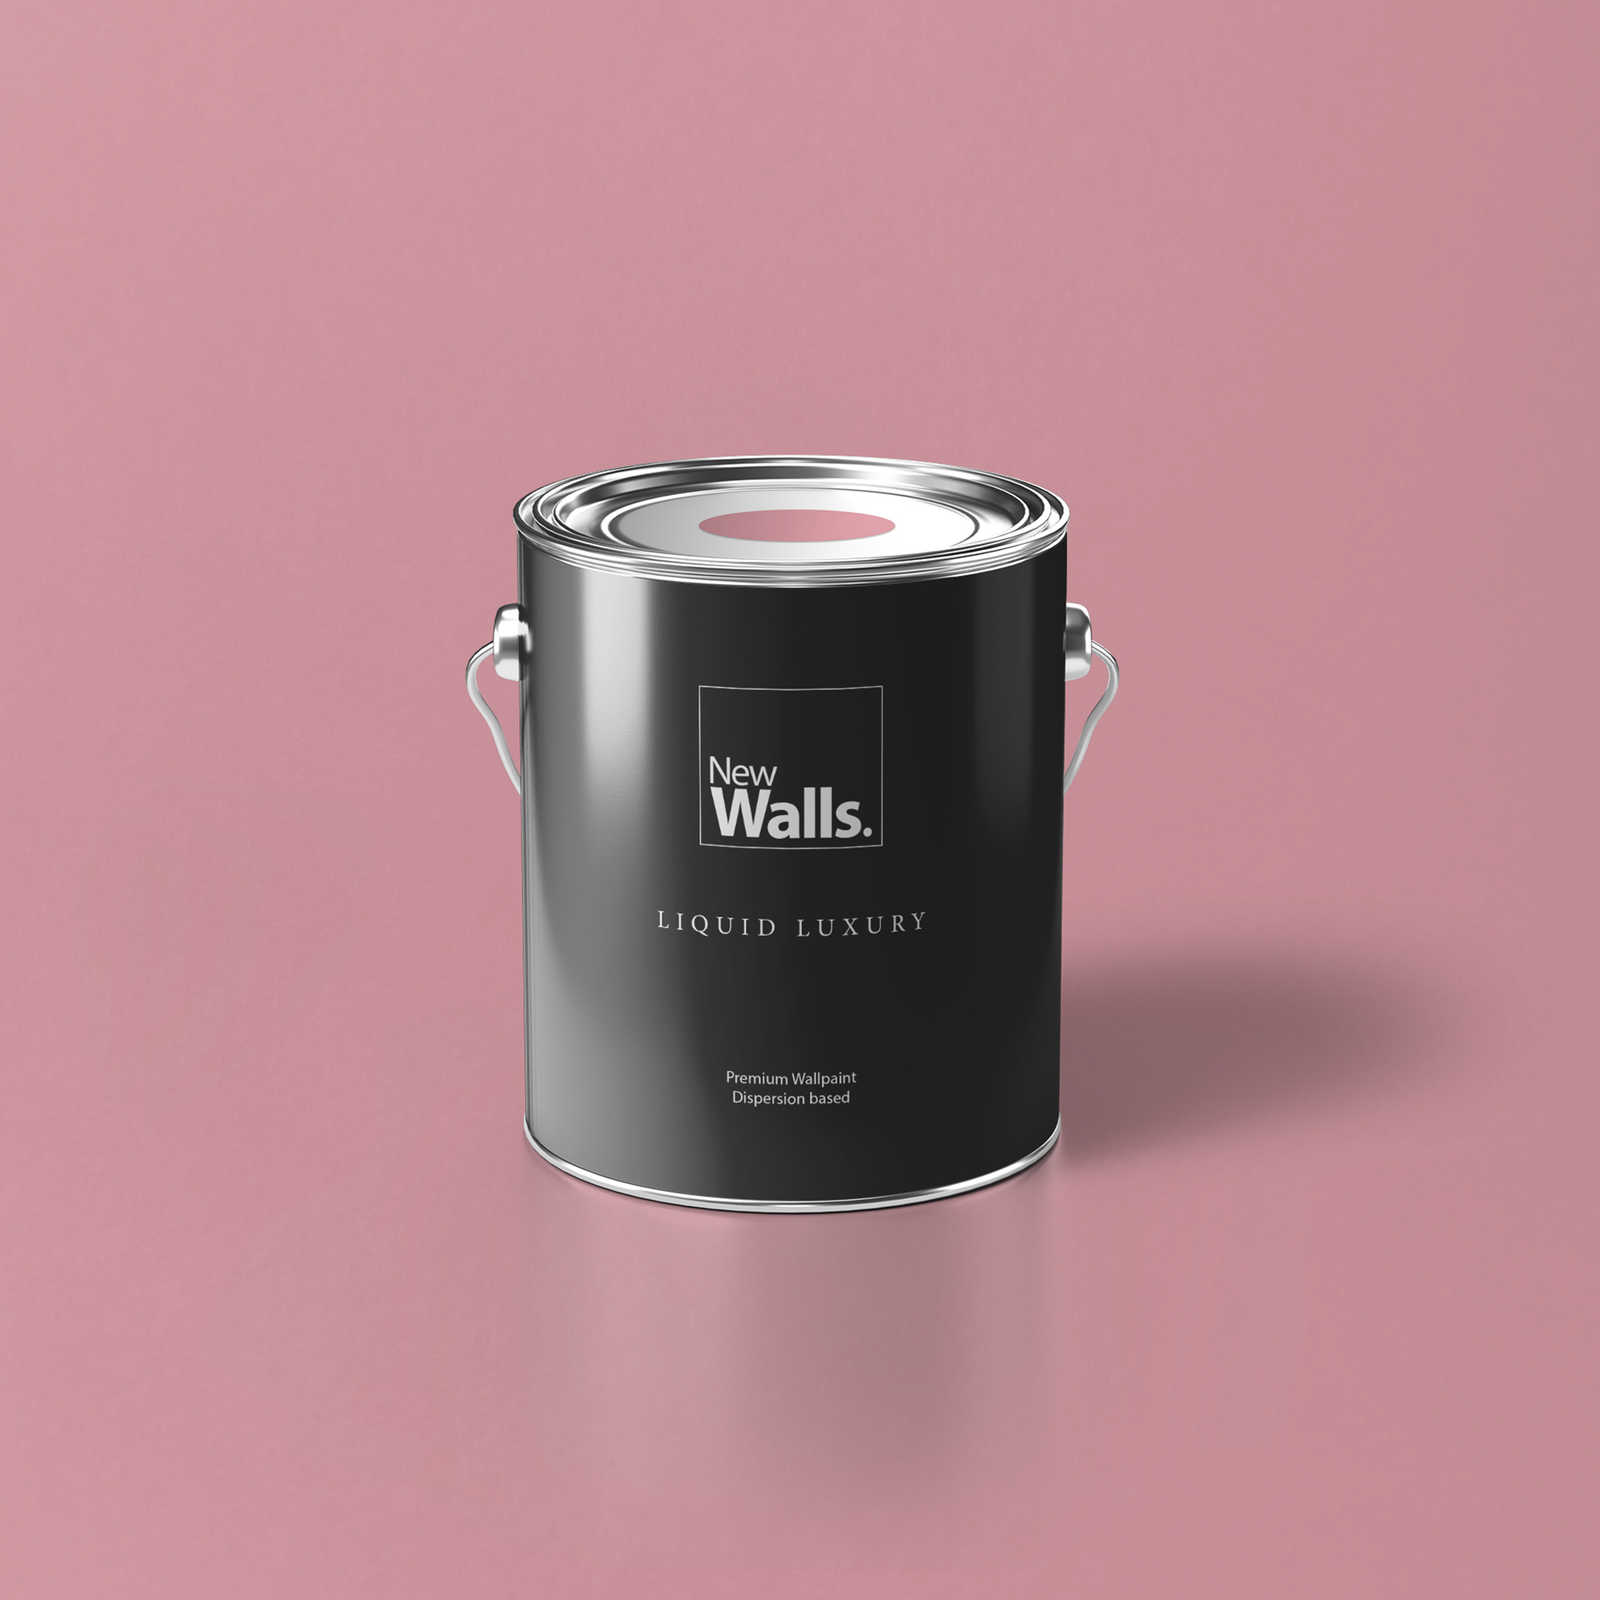 Premium Wall Paint cheerful baby pink »Blooming Blossom« NW1017 – 2,5 litre
